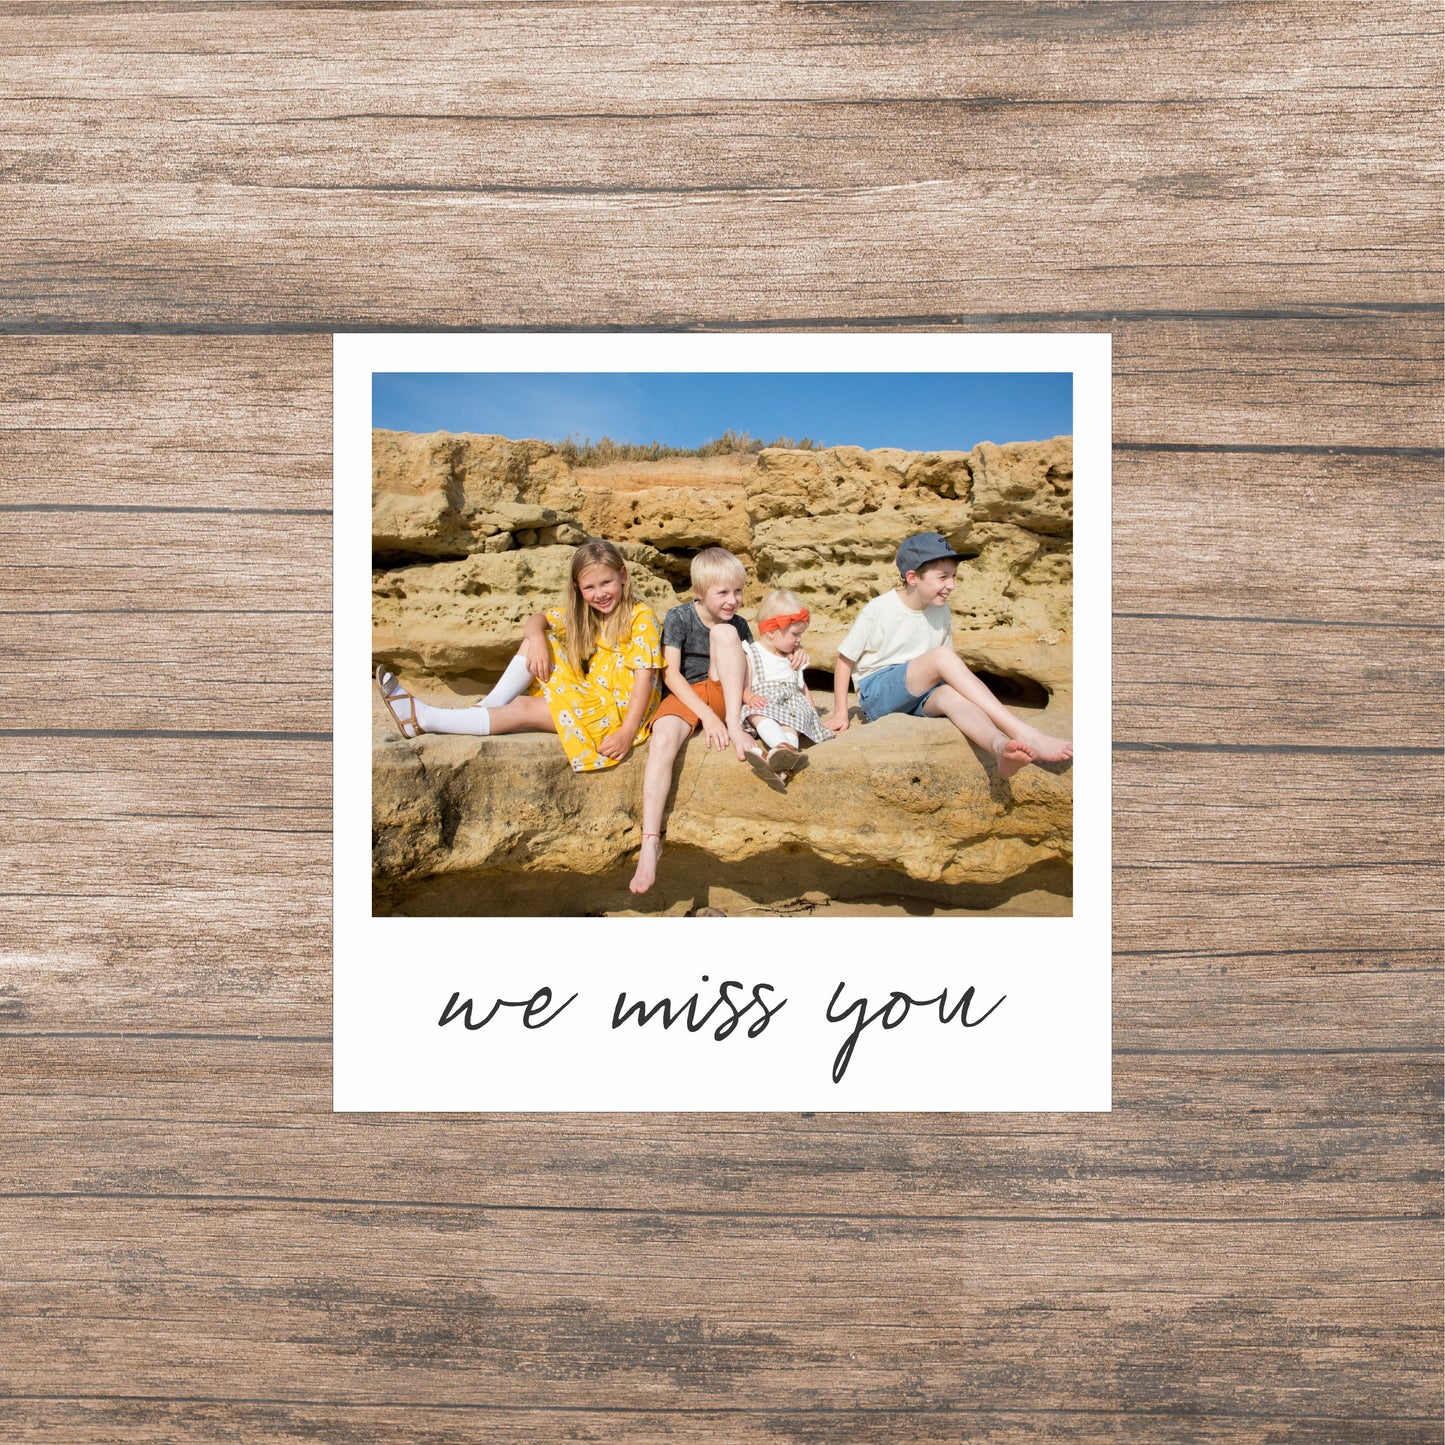 Fabric Photo Wall Decals - large polaroid with message